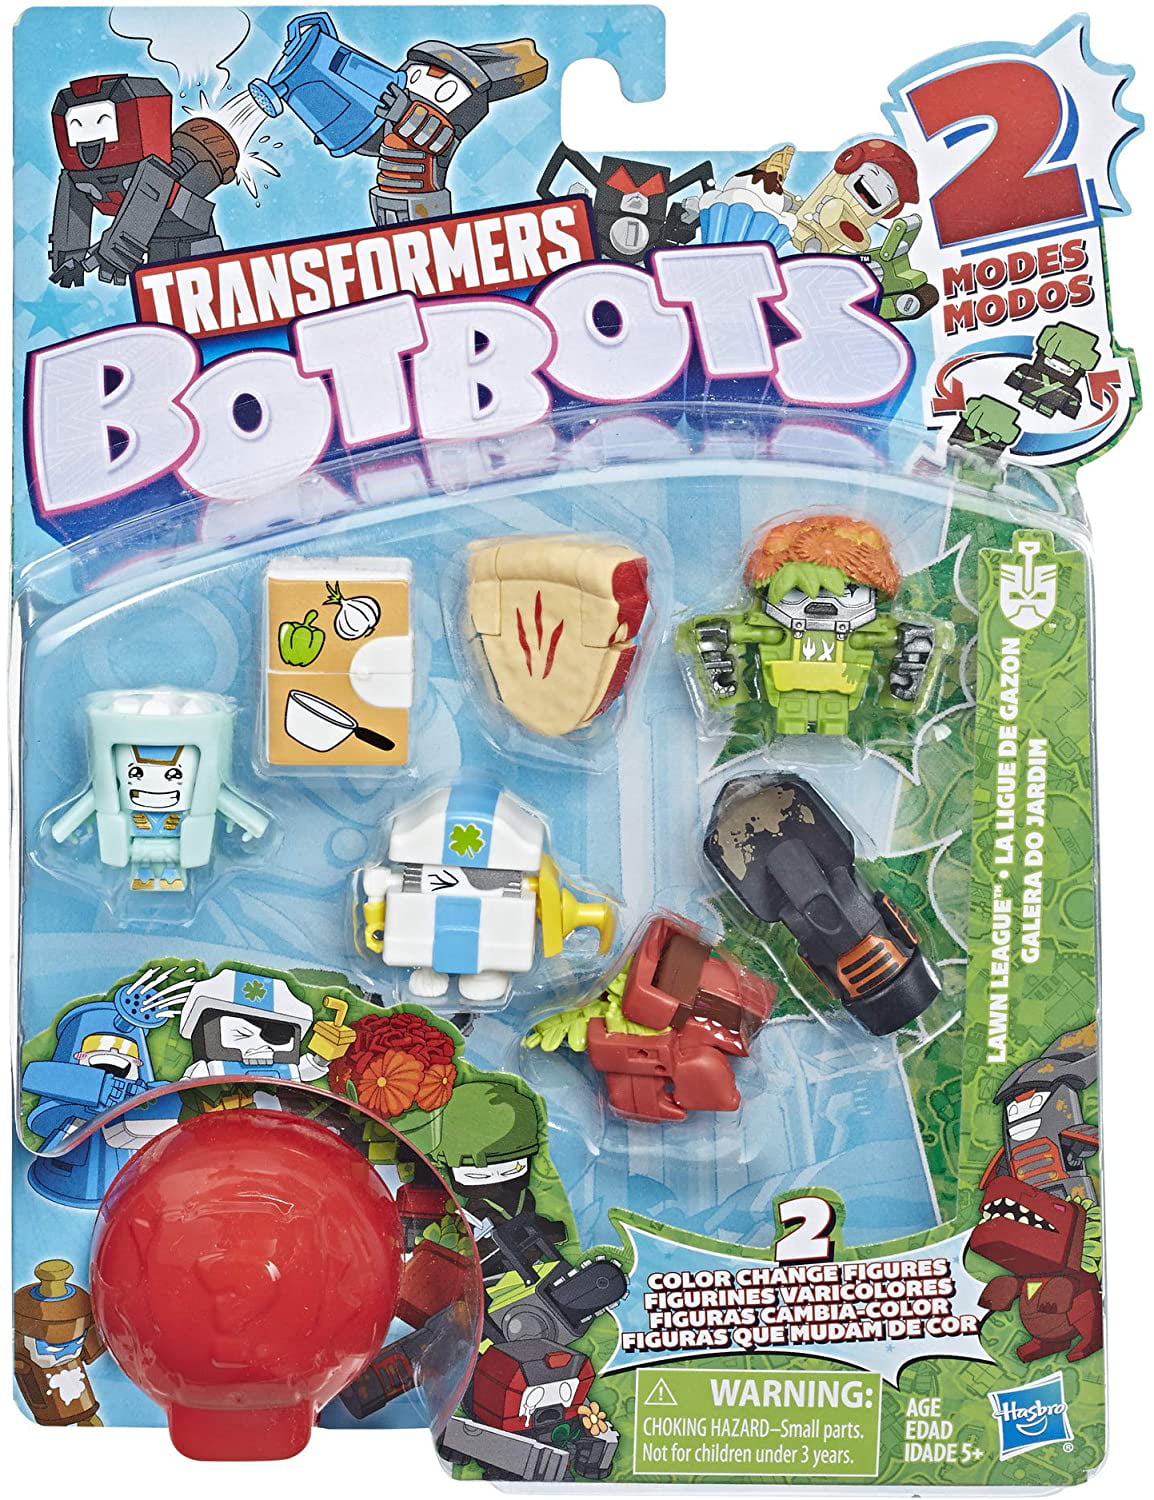 Collectible ... Transformers Botbots Toys Lawn League Mystery 8 Pack Series 1